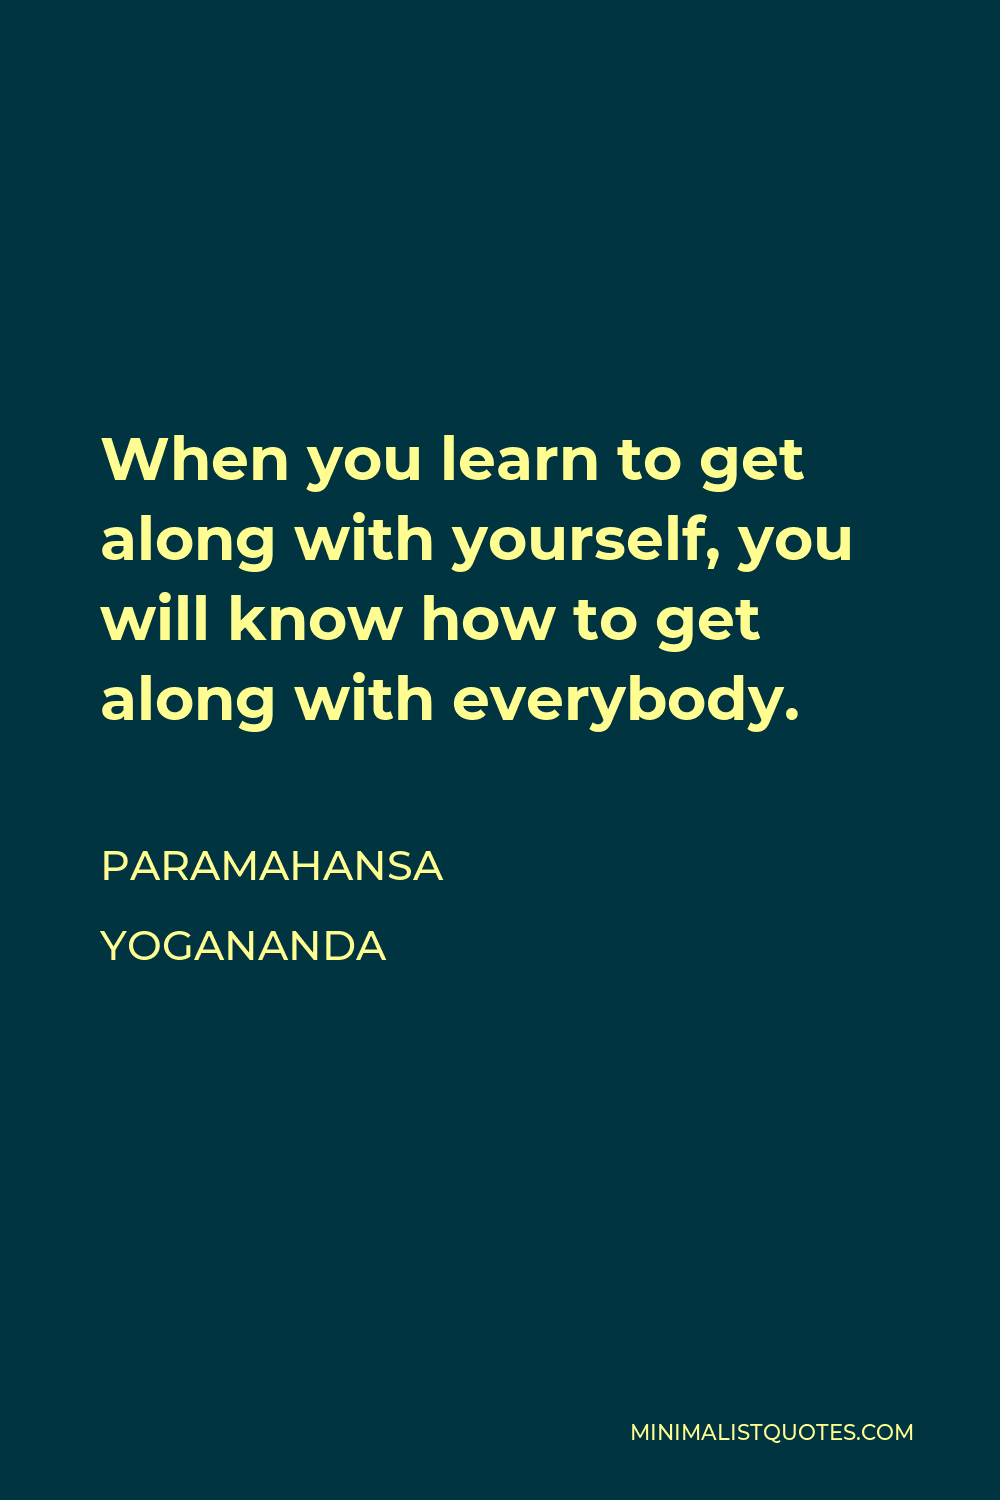 Paramahansa Yogananda Quote - When you learn to get along with yourself, you will know how to get along with everybody.